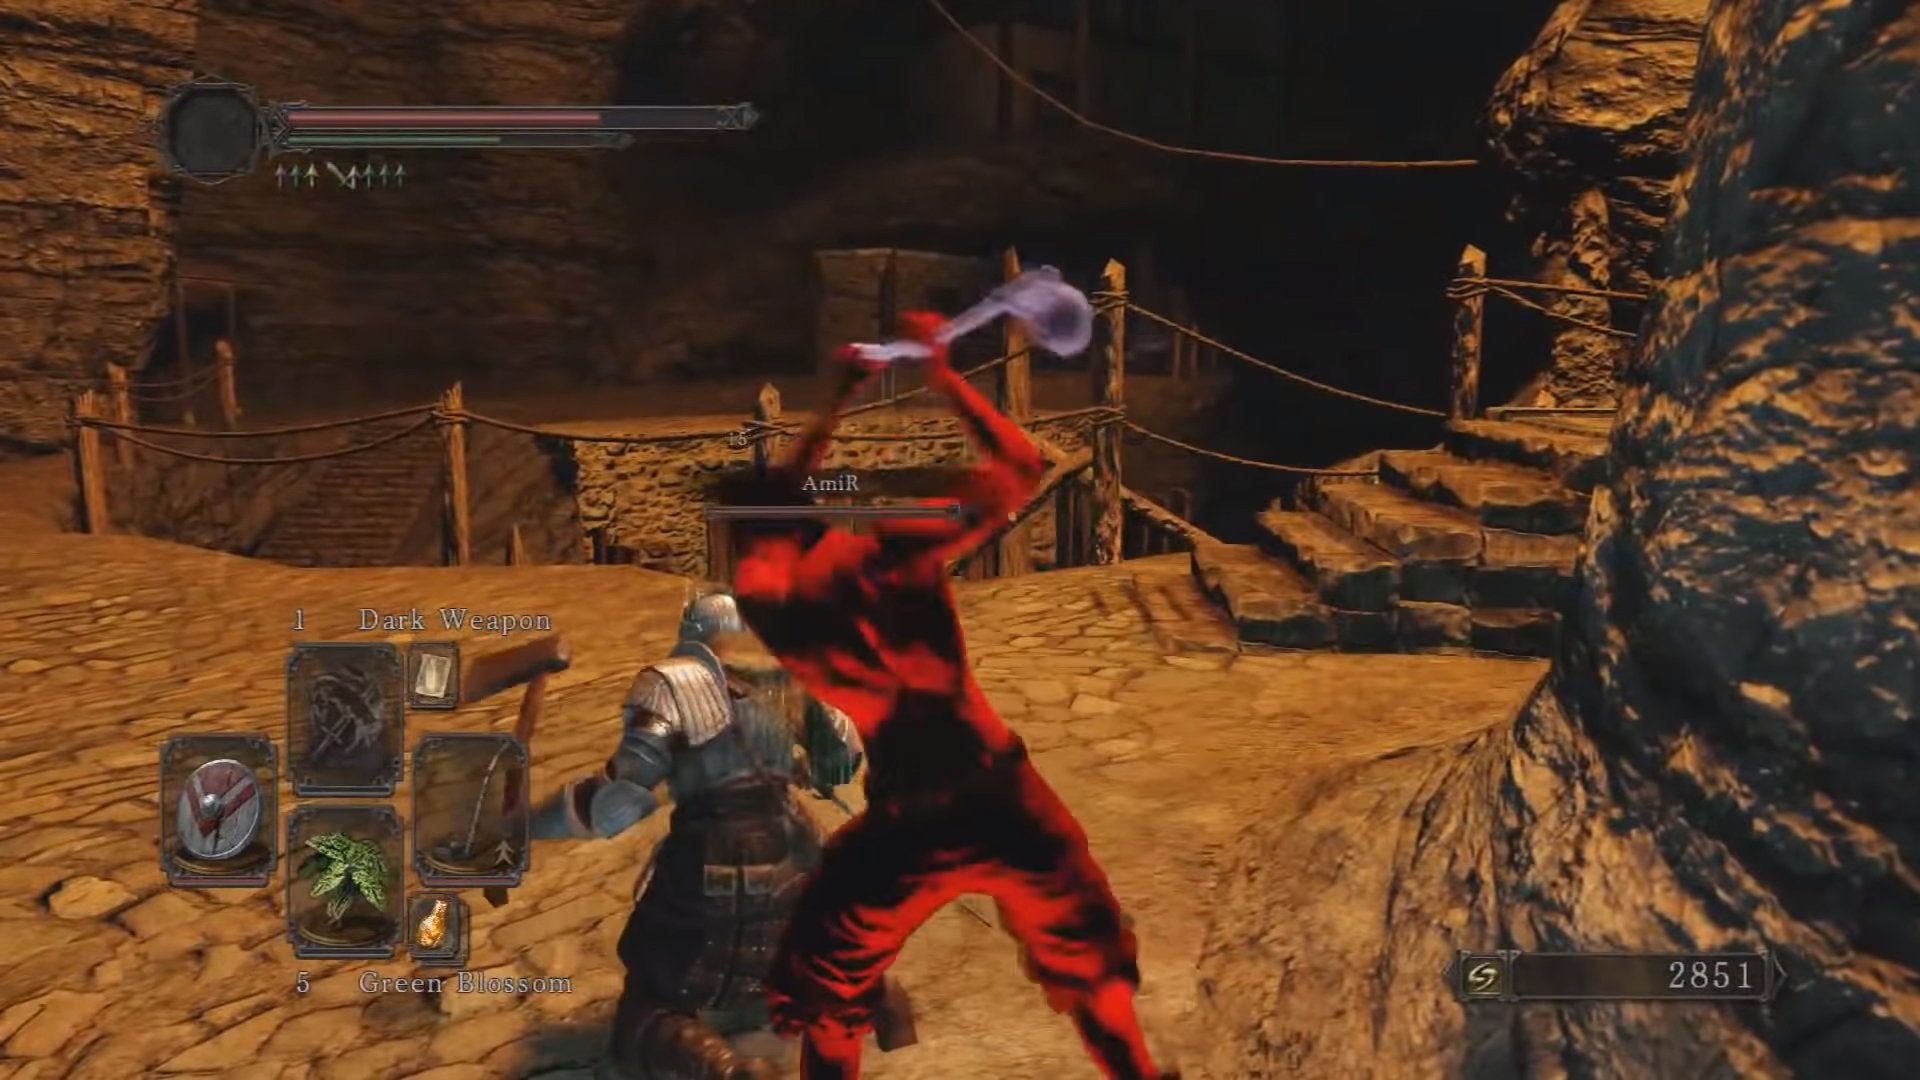 A player hitting another player in the back with a ladle in Dark Souls 2.